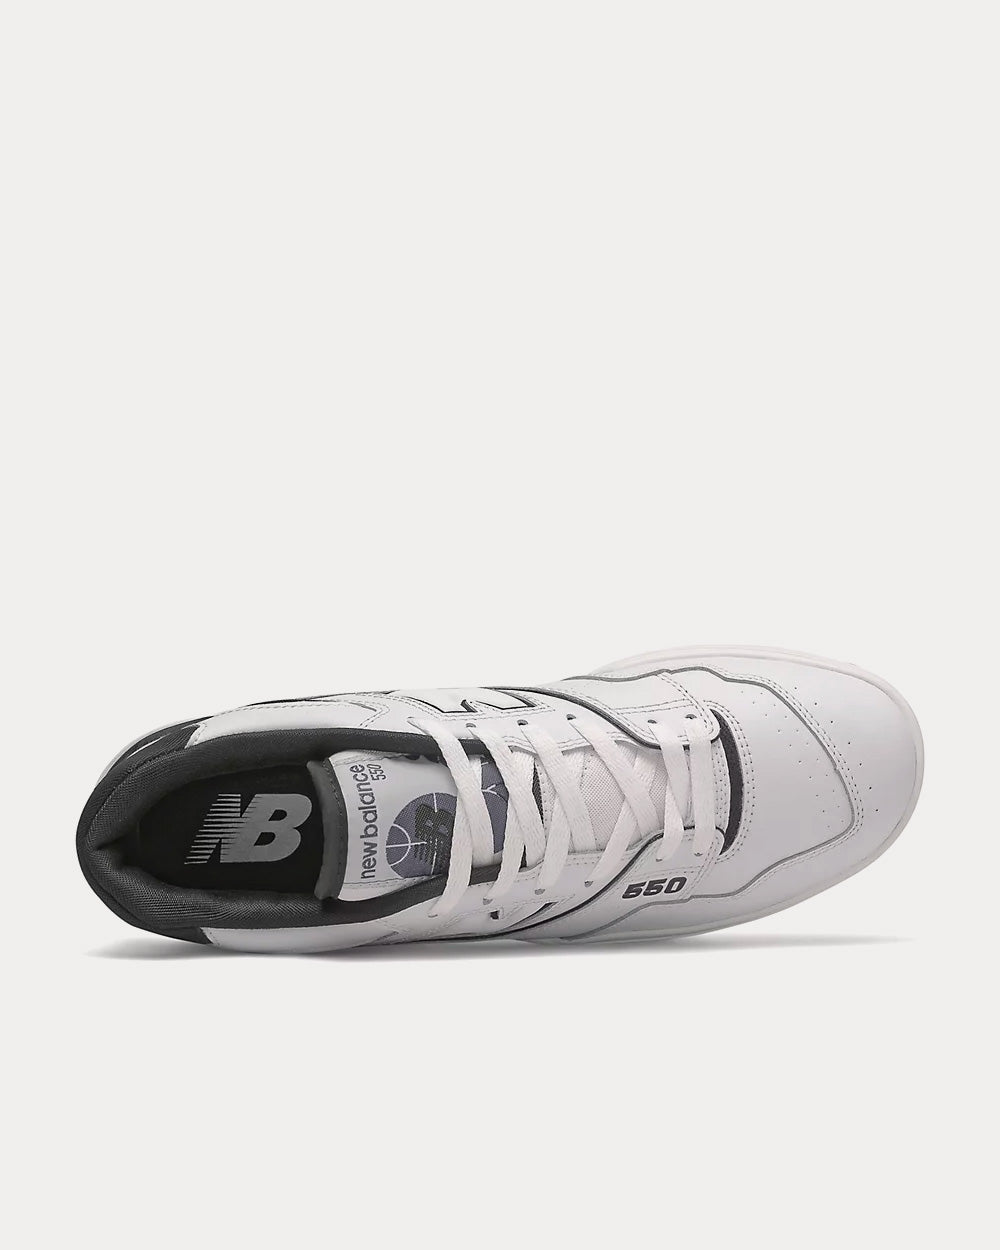 New Balance - 550 White with Black Low Top Sneakers